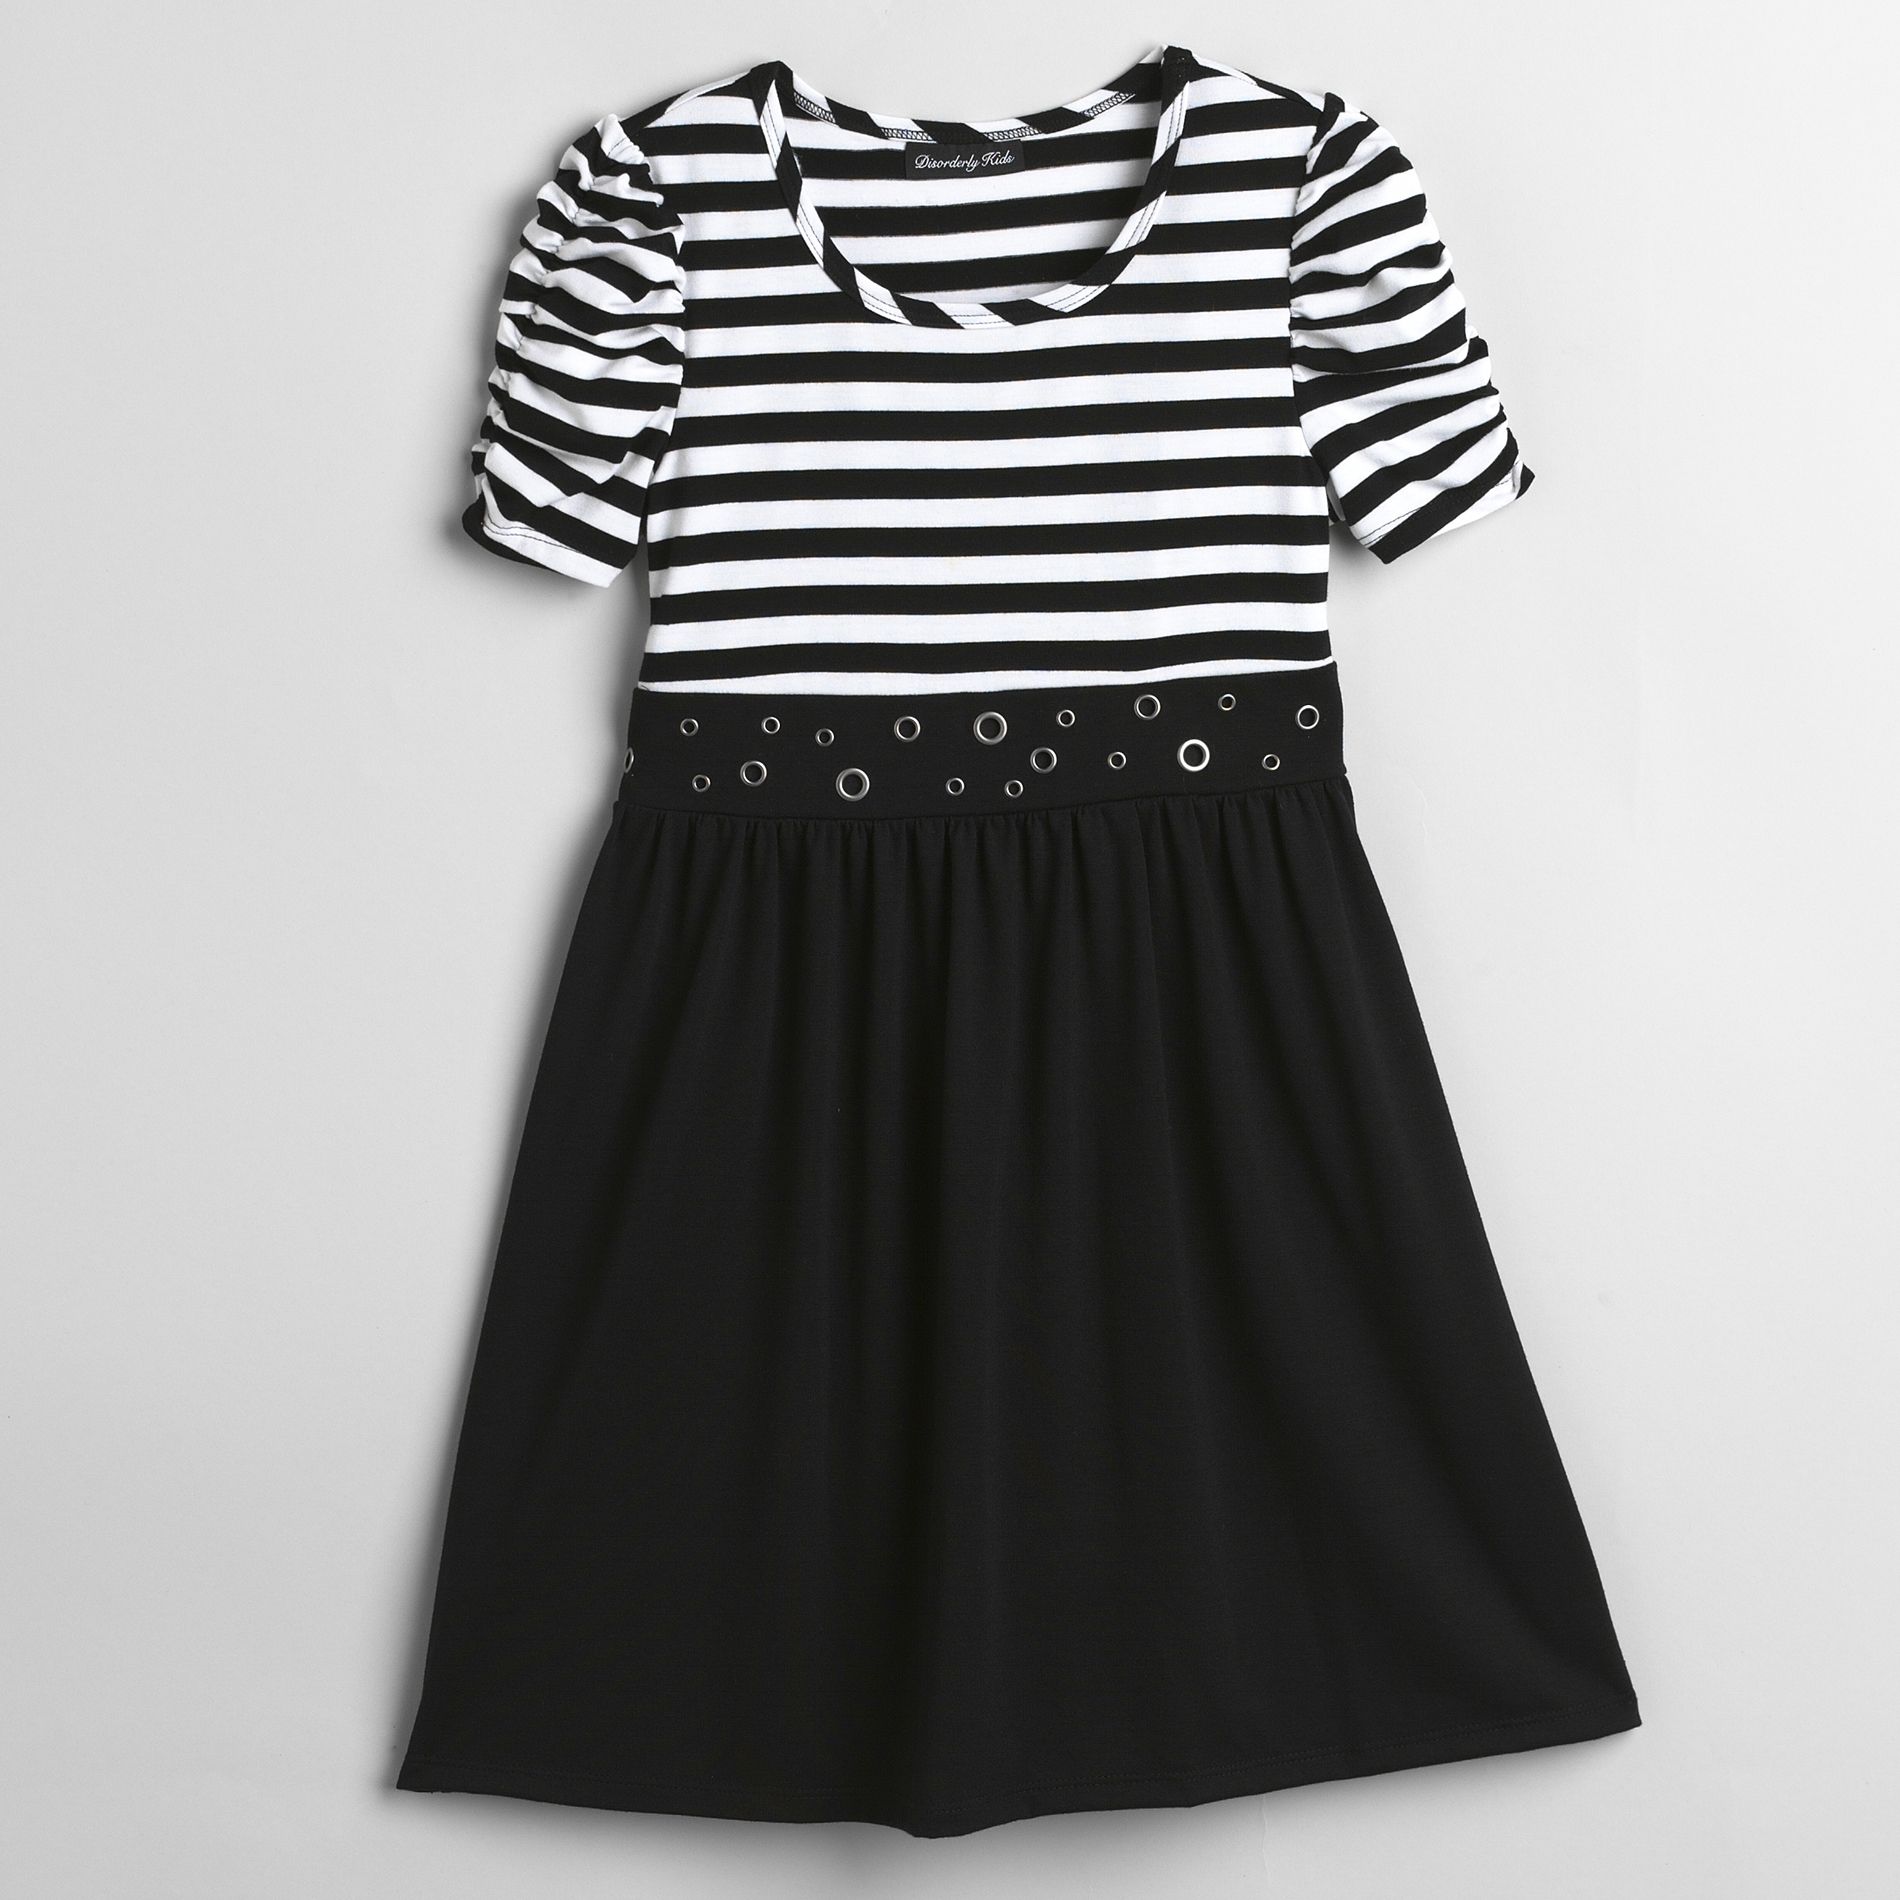 Disorderly Kids Girl&#39;s 7-16 Short Sleeve Striped Dress with Grommets At Neckline